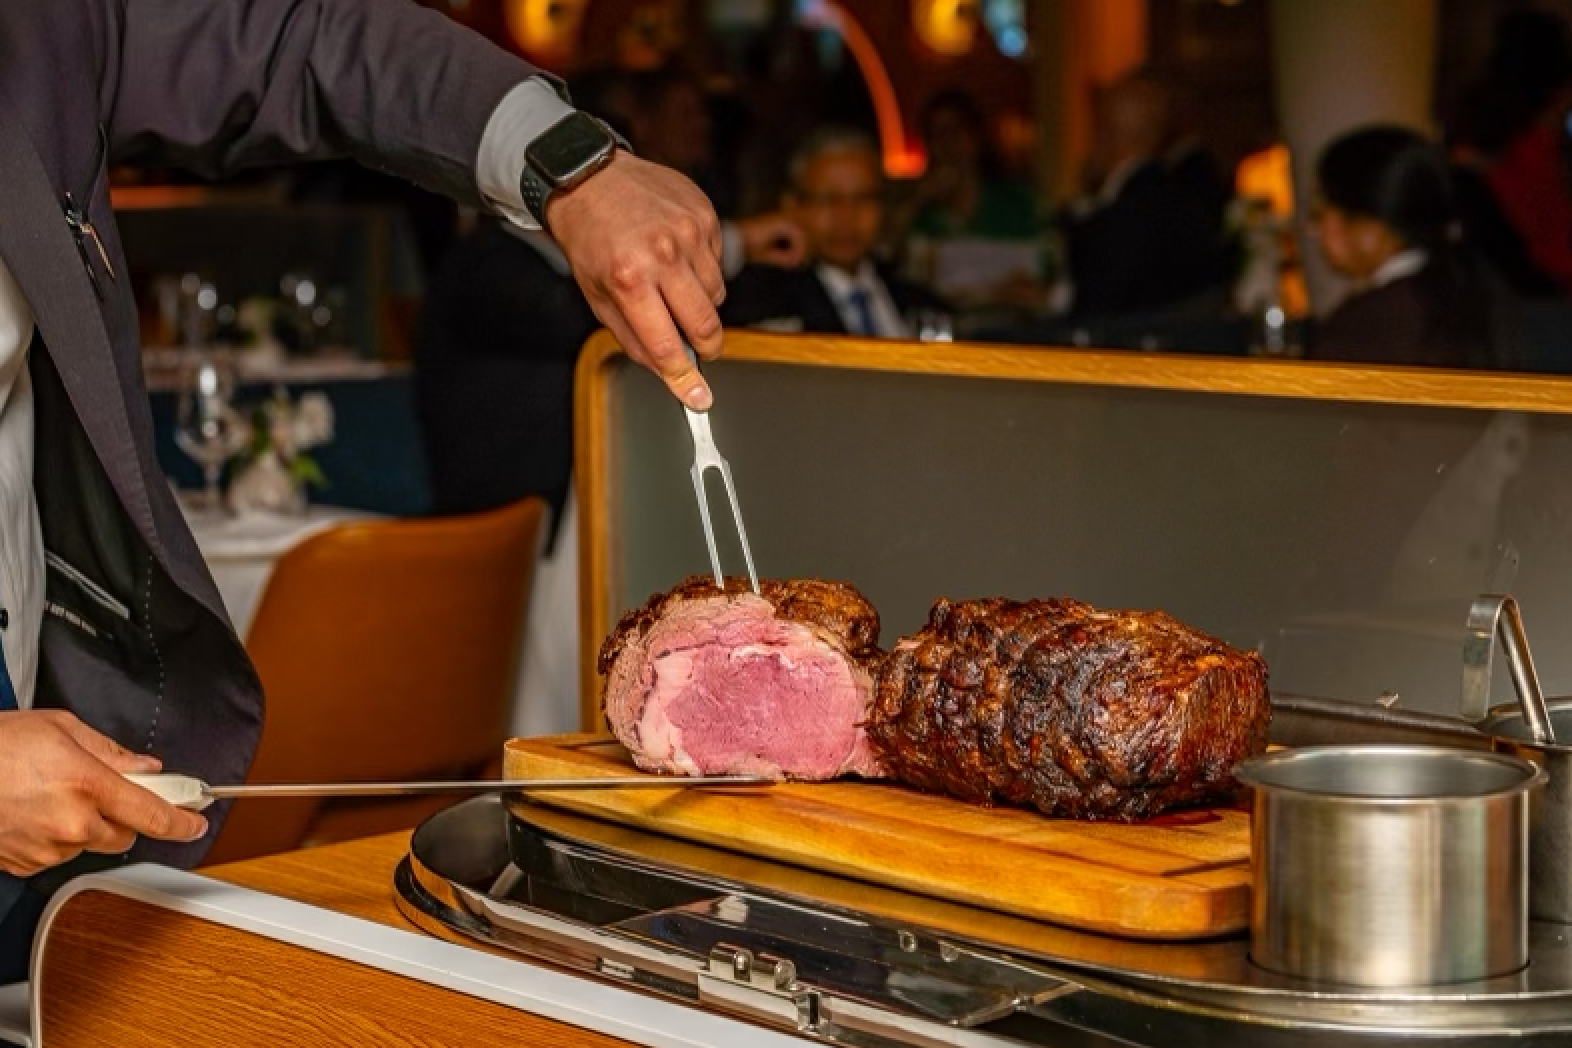 https://www.themanual.com/wp-content/uploads/sites/9/2019/01/Monetery-prime-rib-sliced.jpg?fit=1572%2C1048&p=1